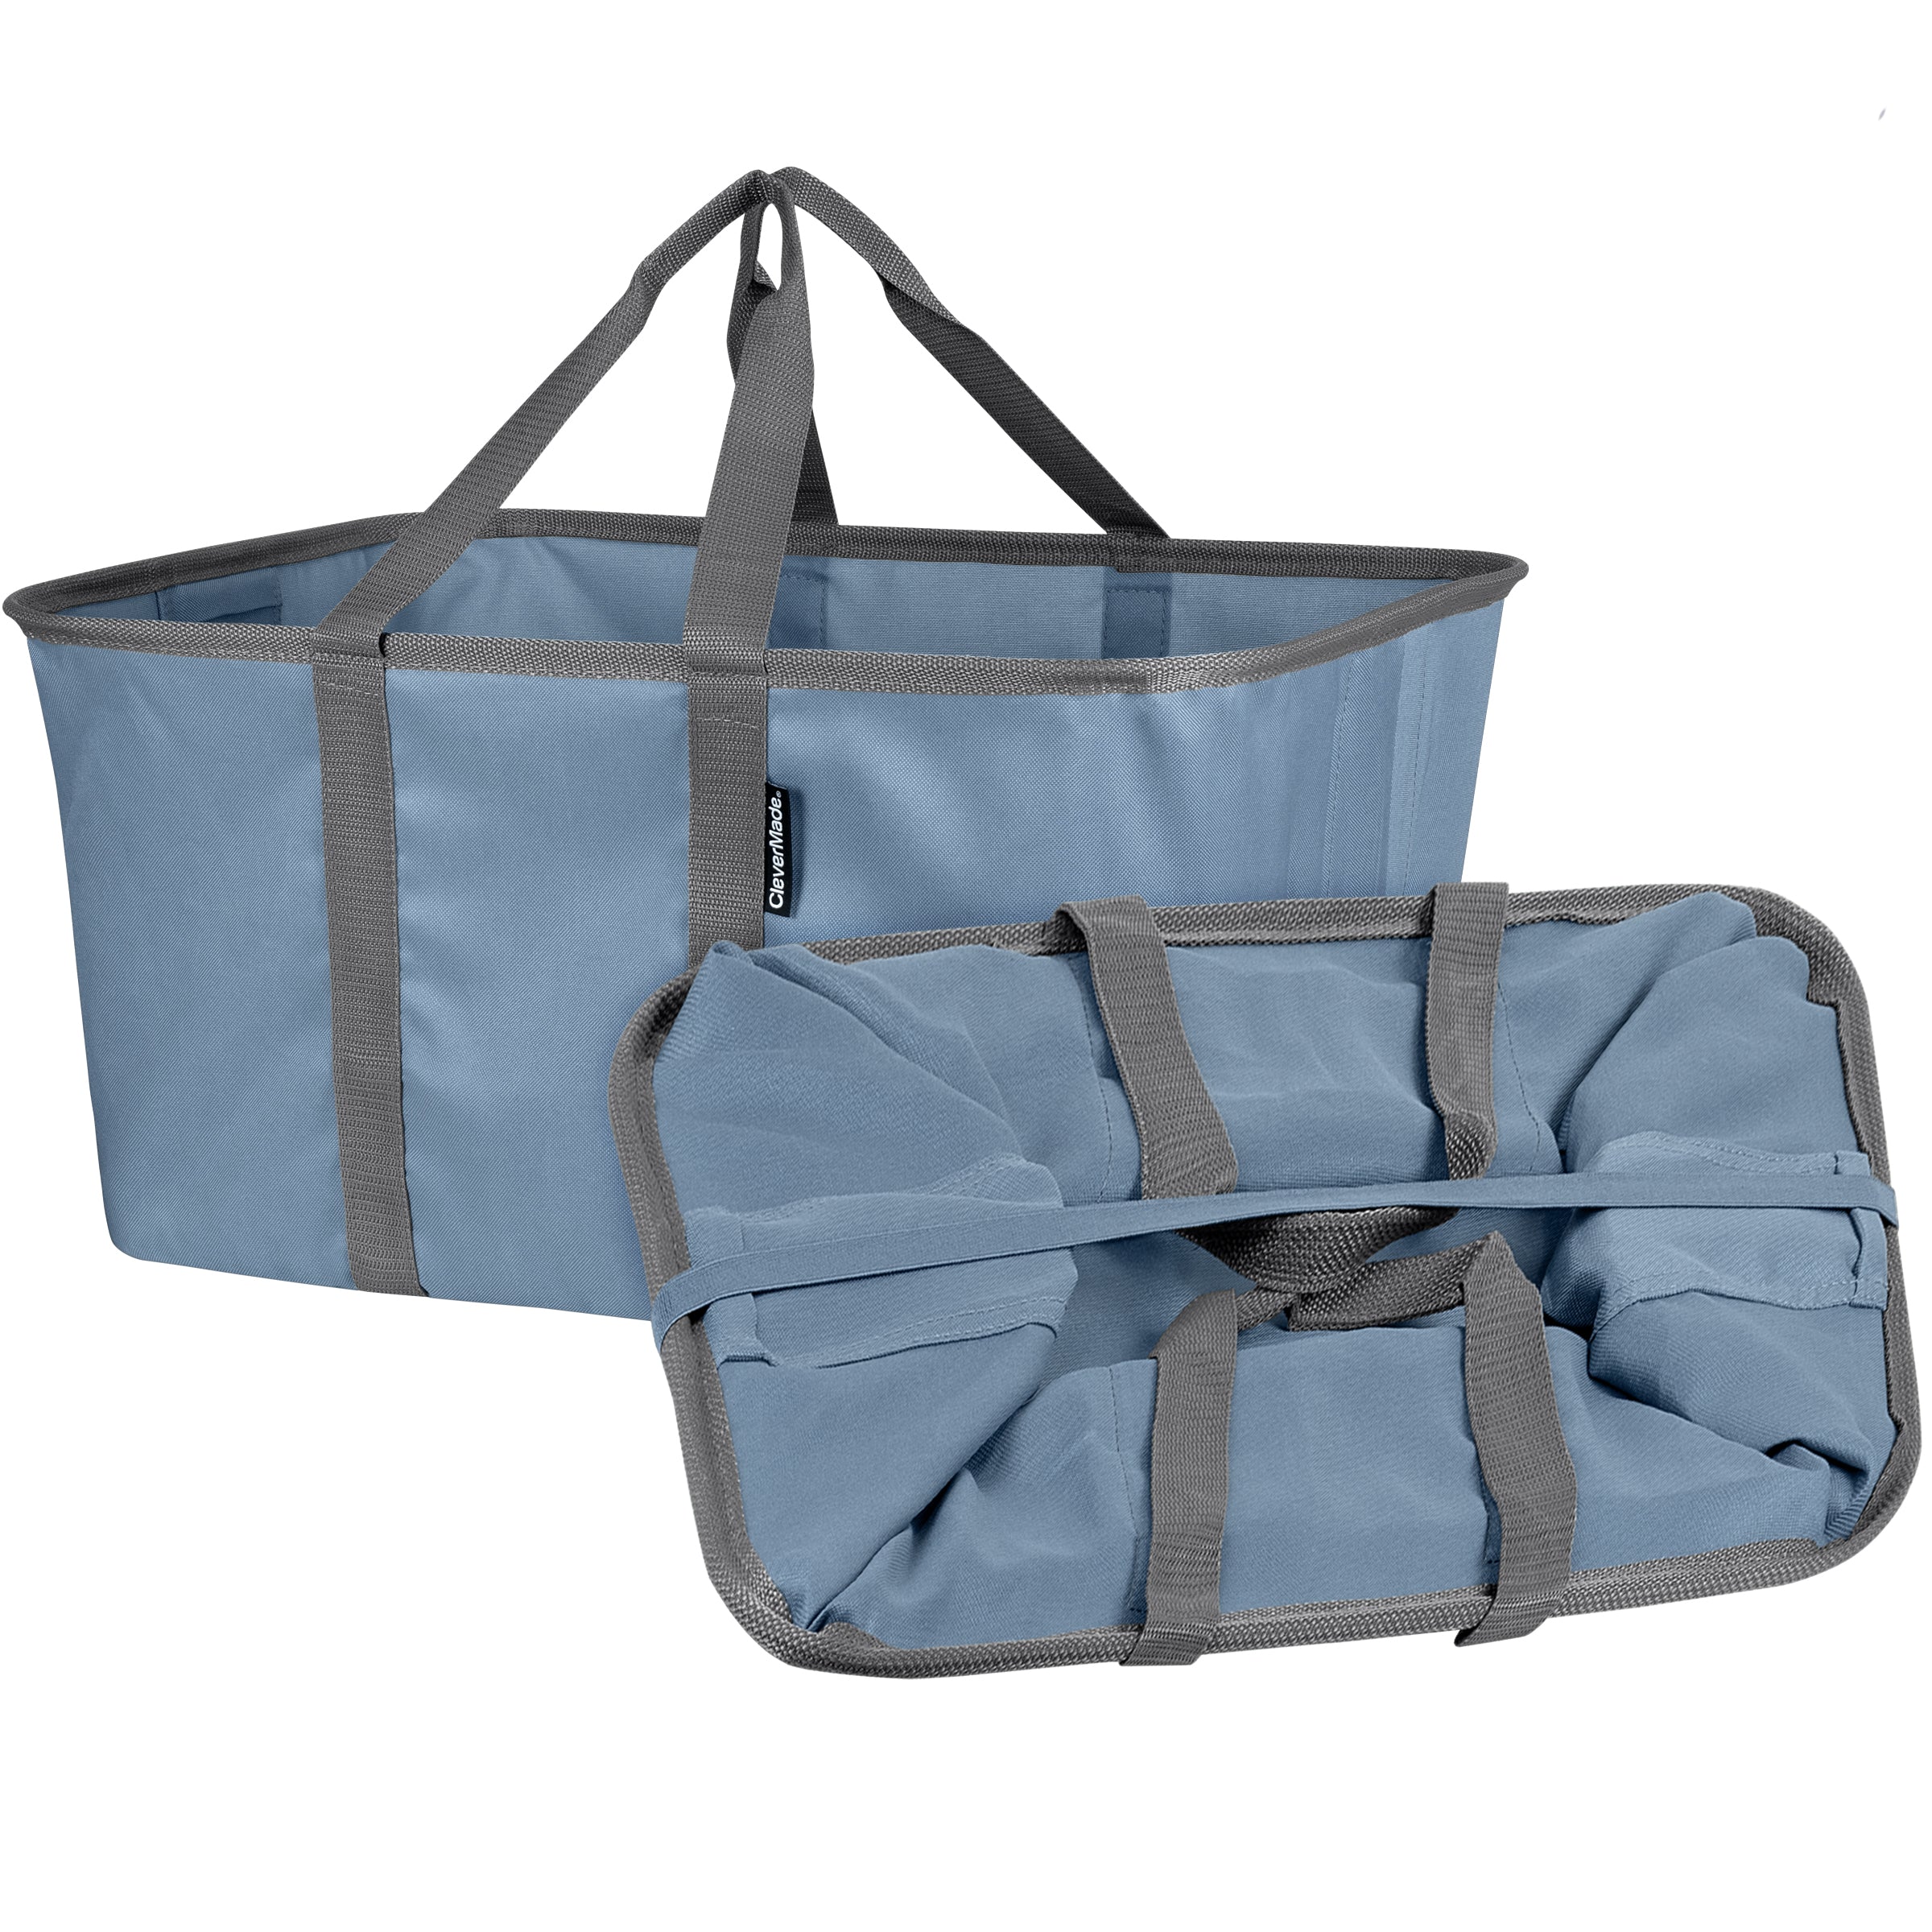 CleverMade 17-Gallon (s) Polyester Laundry Basket in the Laundry